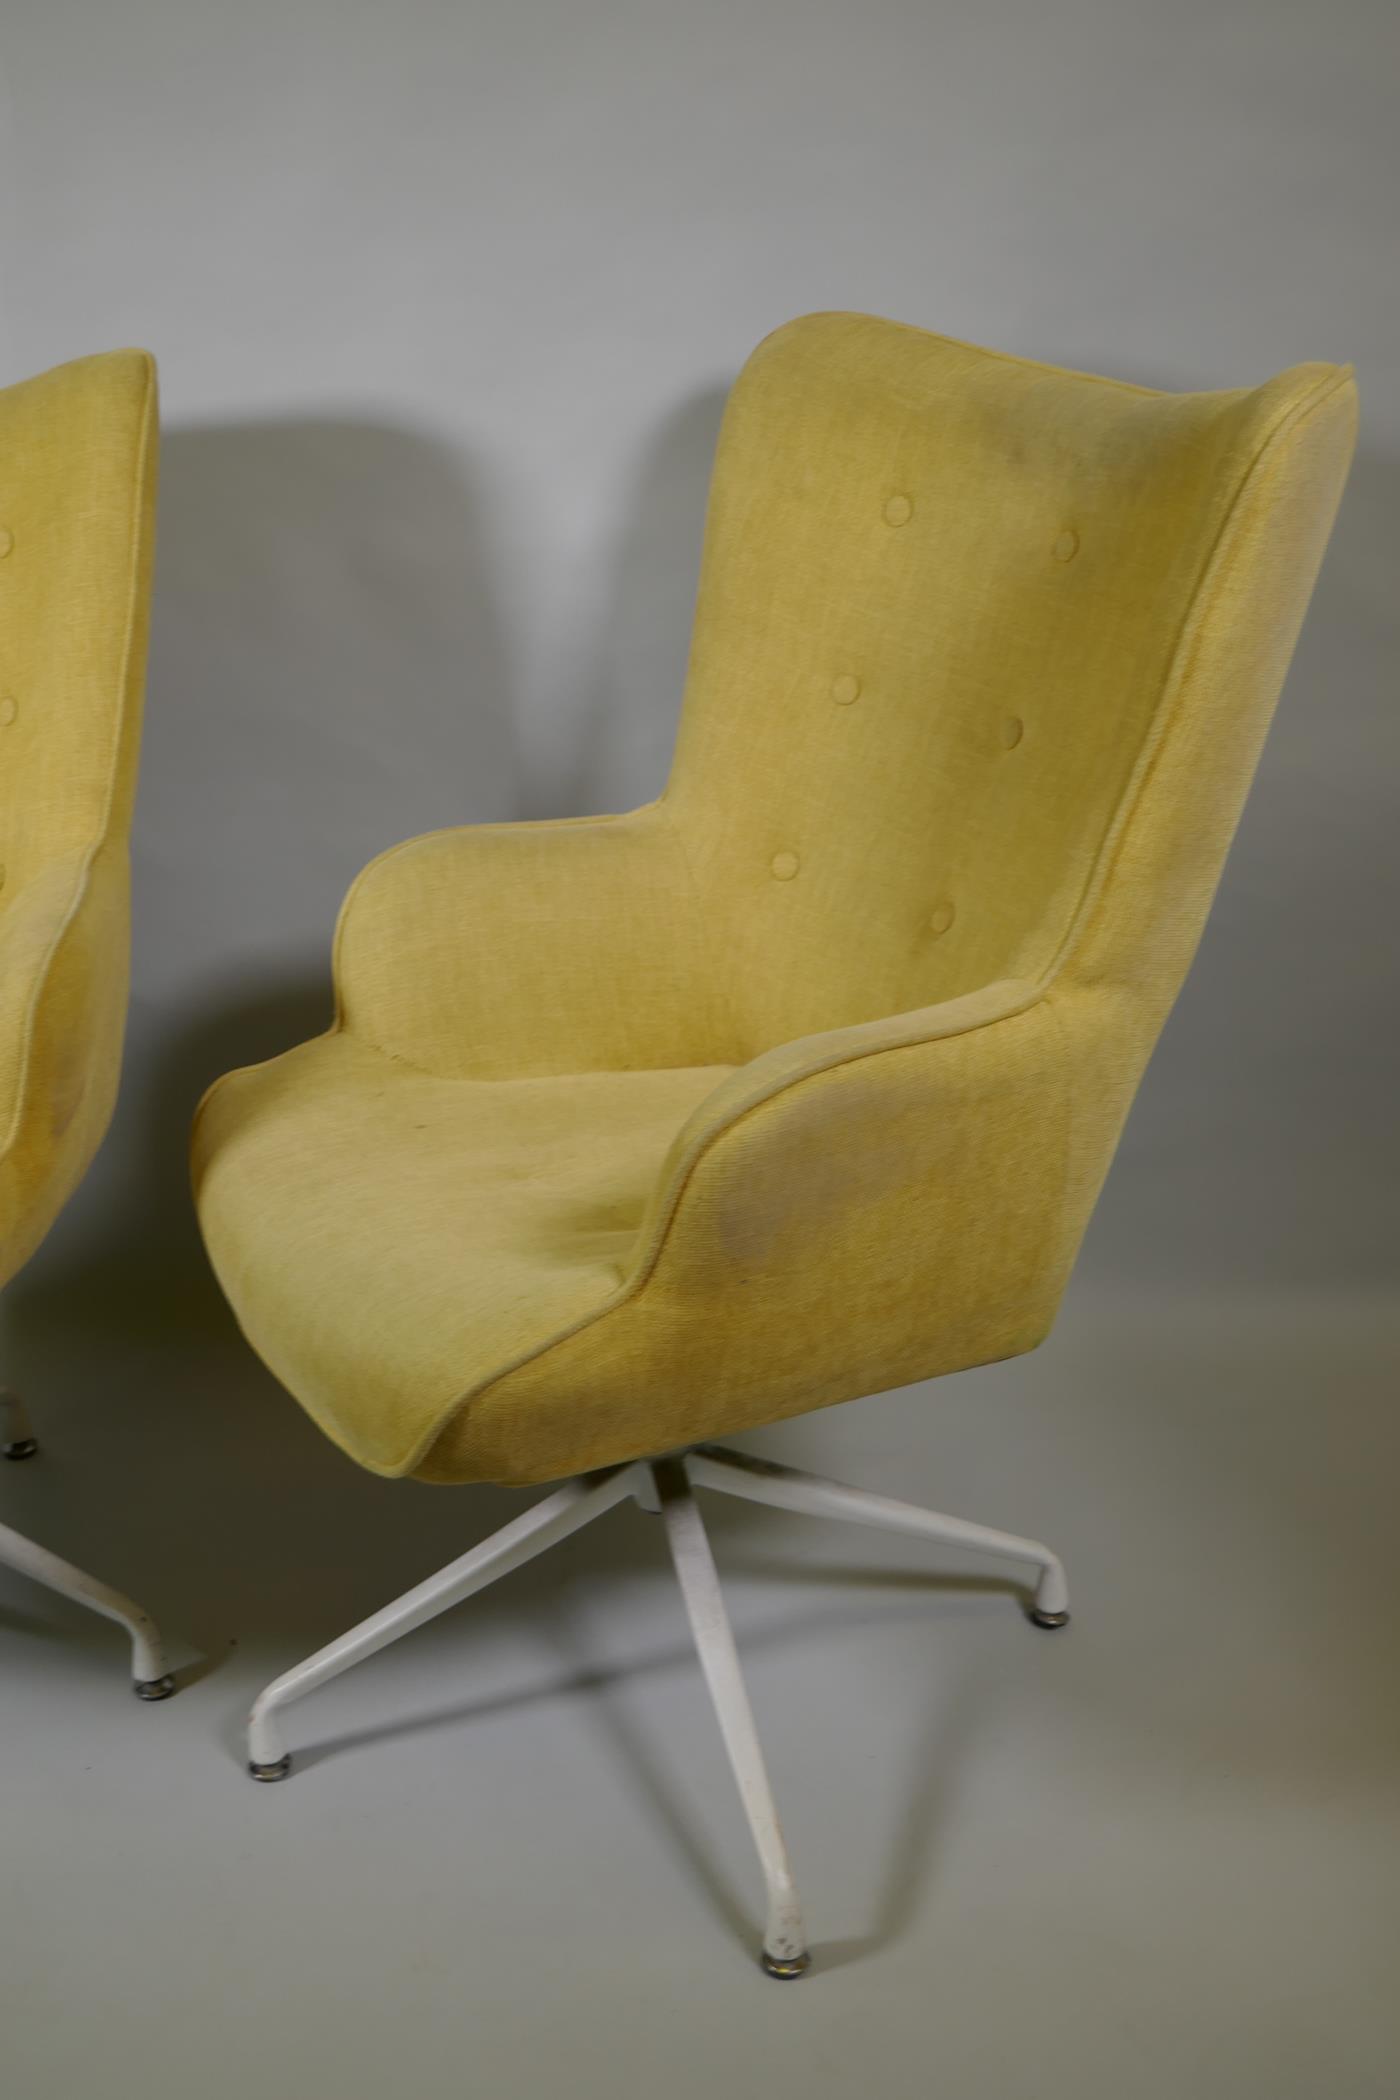 A pair of reclining swivel armchairs on spider legs - Image 3 of 4